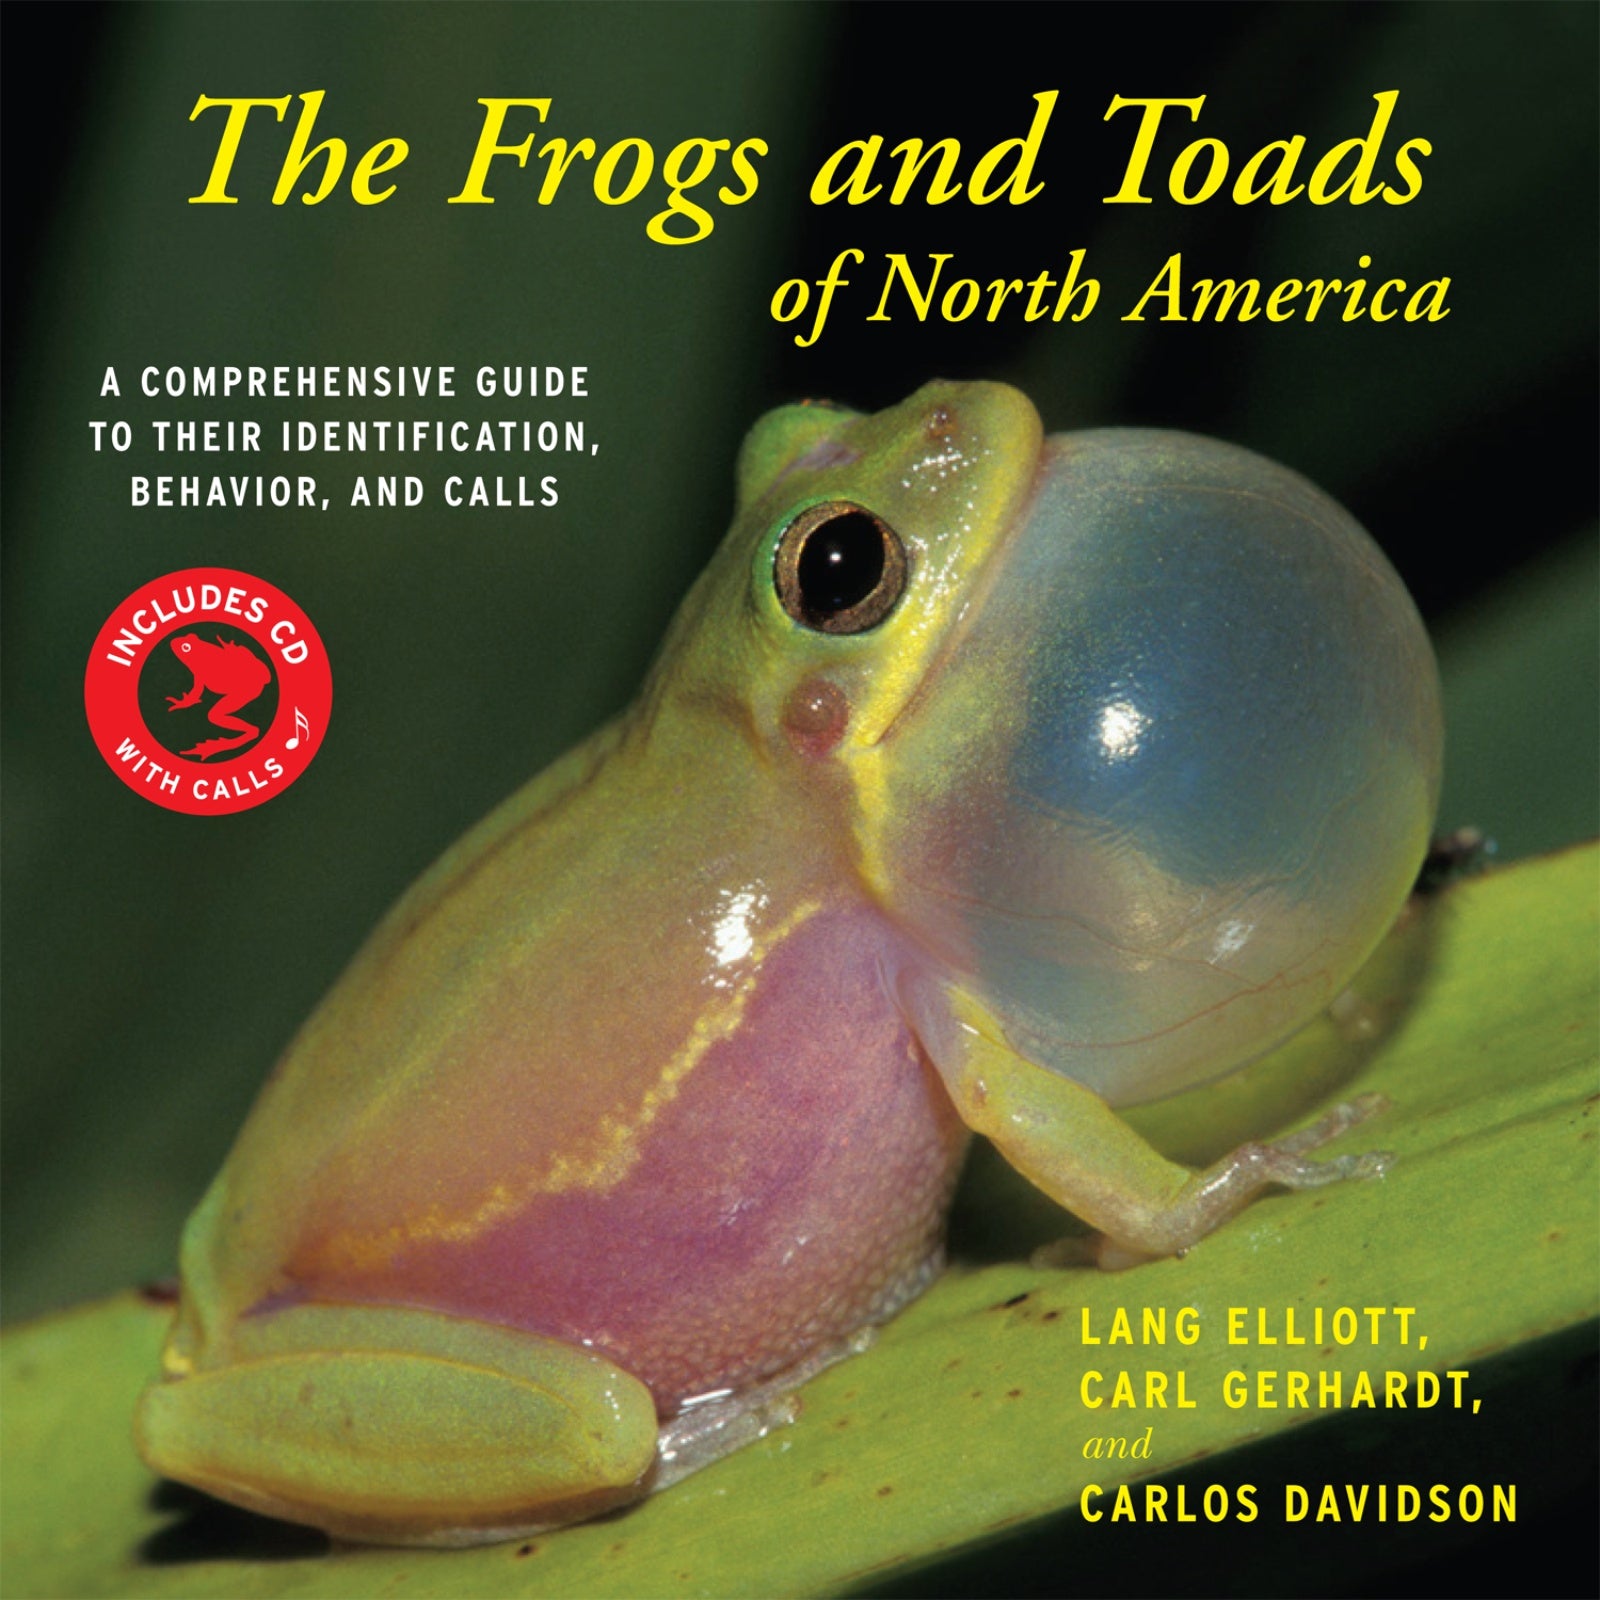 The Frogs And Toads Of North America : A Comprehensive Guide to Their Identification,Behavior, and Calls